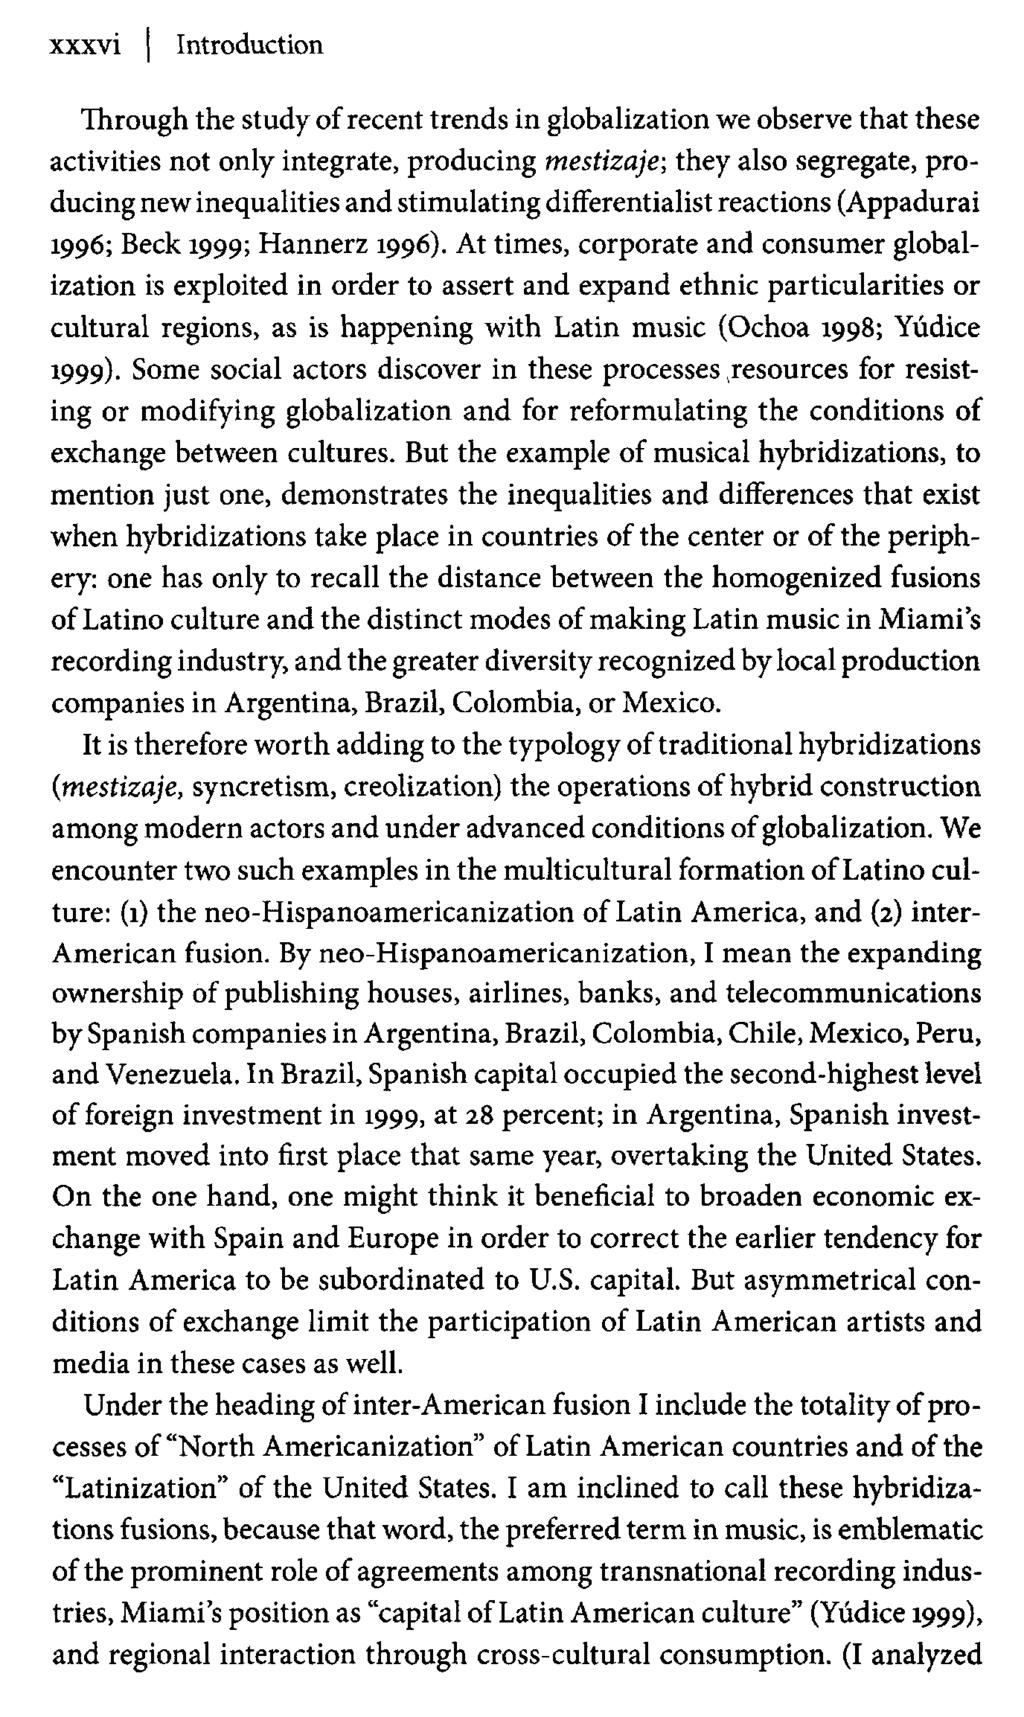 xxxvi Introduction Through the study of recent trends in globalization we observe that these activities not only integrate, producing mestizaje; they also segregate, producing new inequalities and